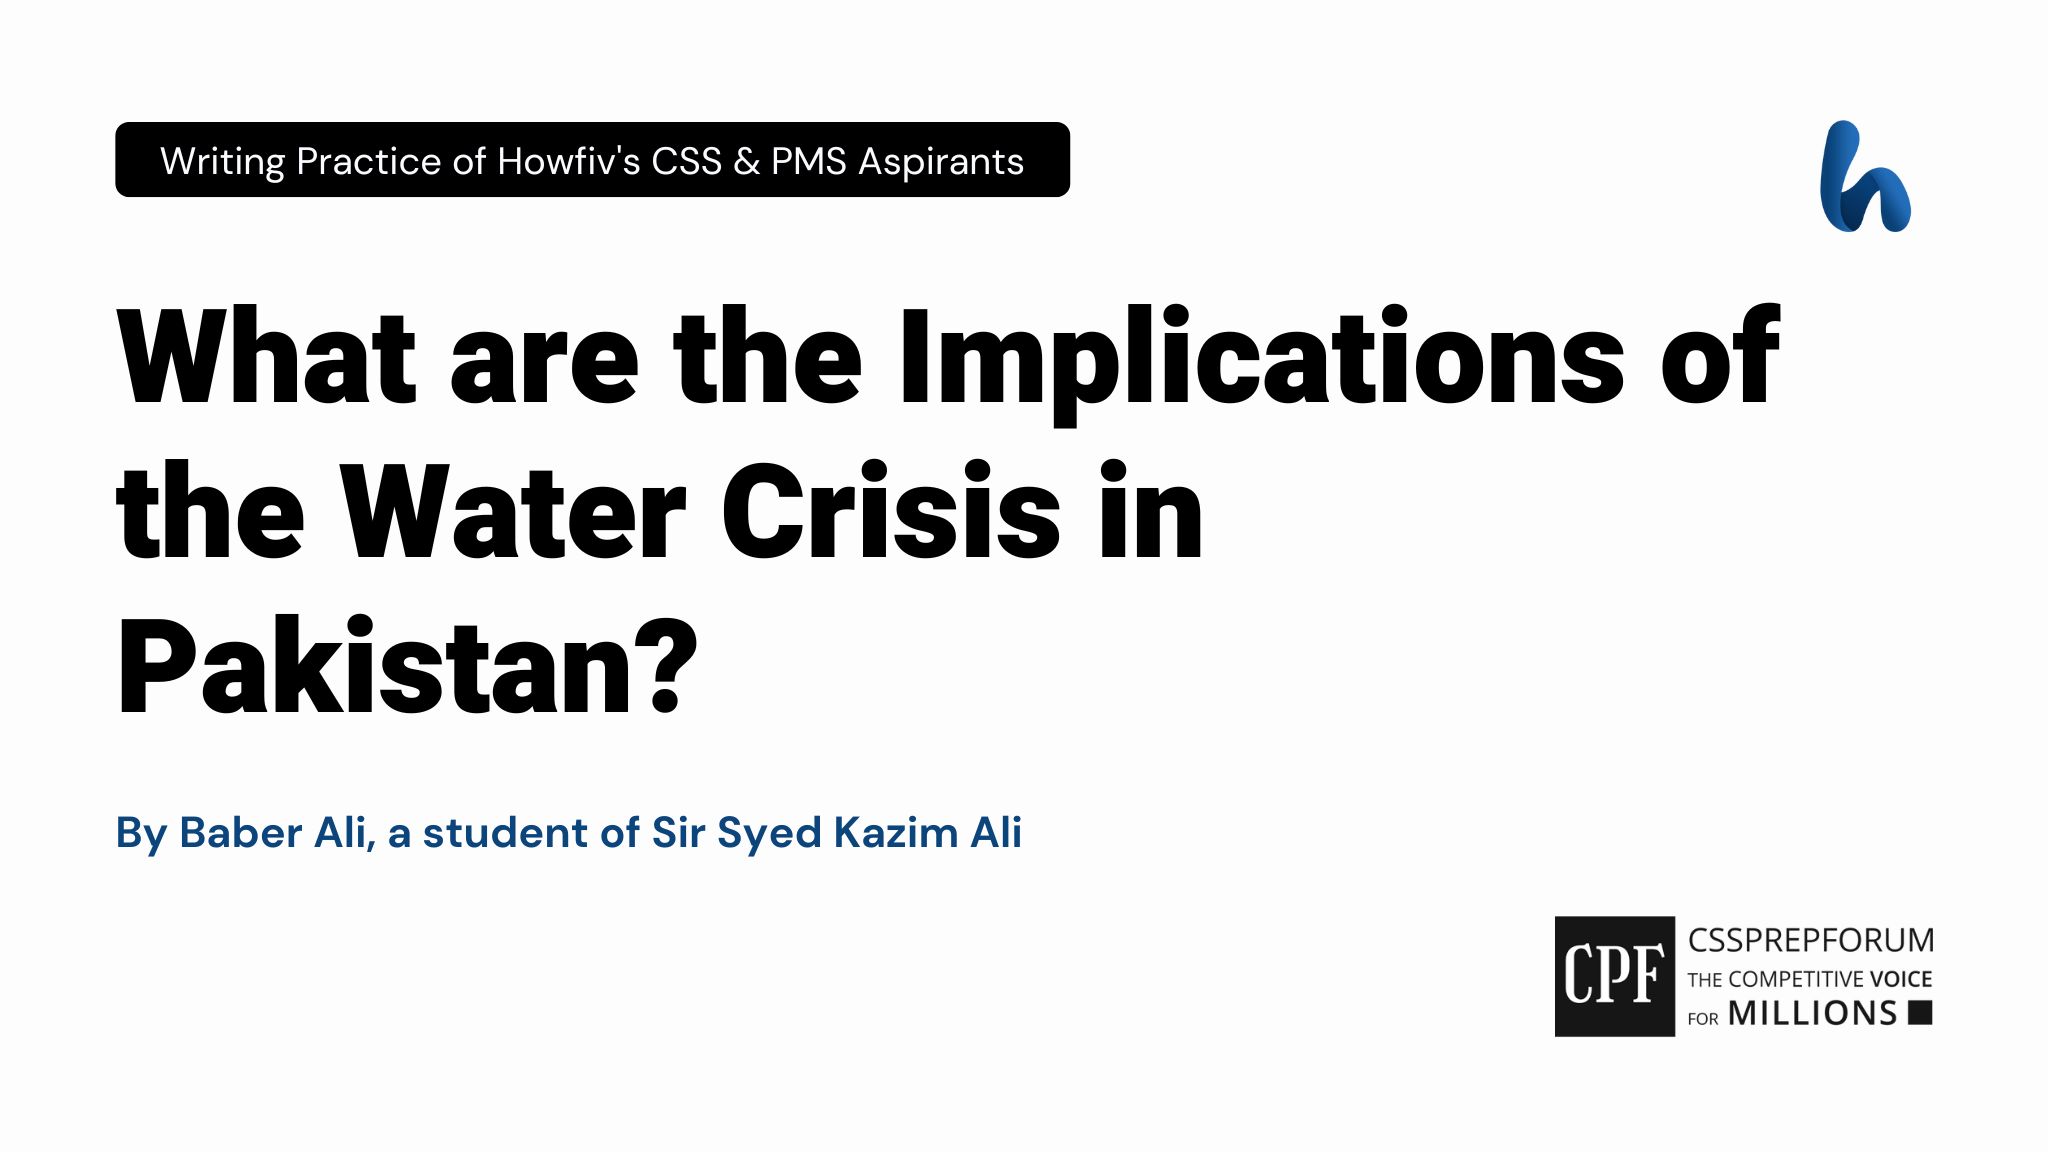 The Water Crisis Implications in Pakistan by Baber Ali